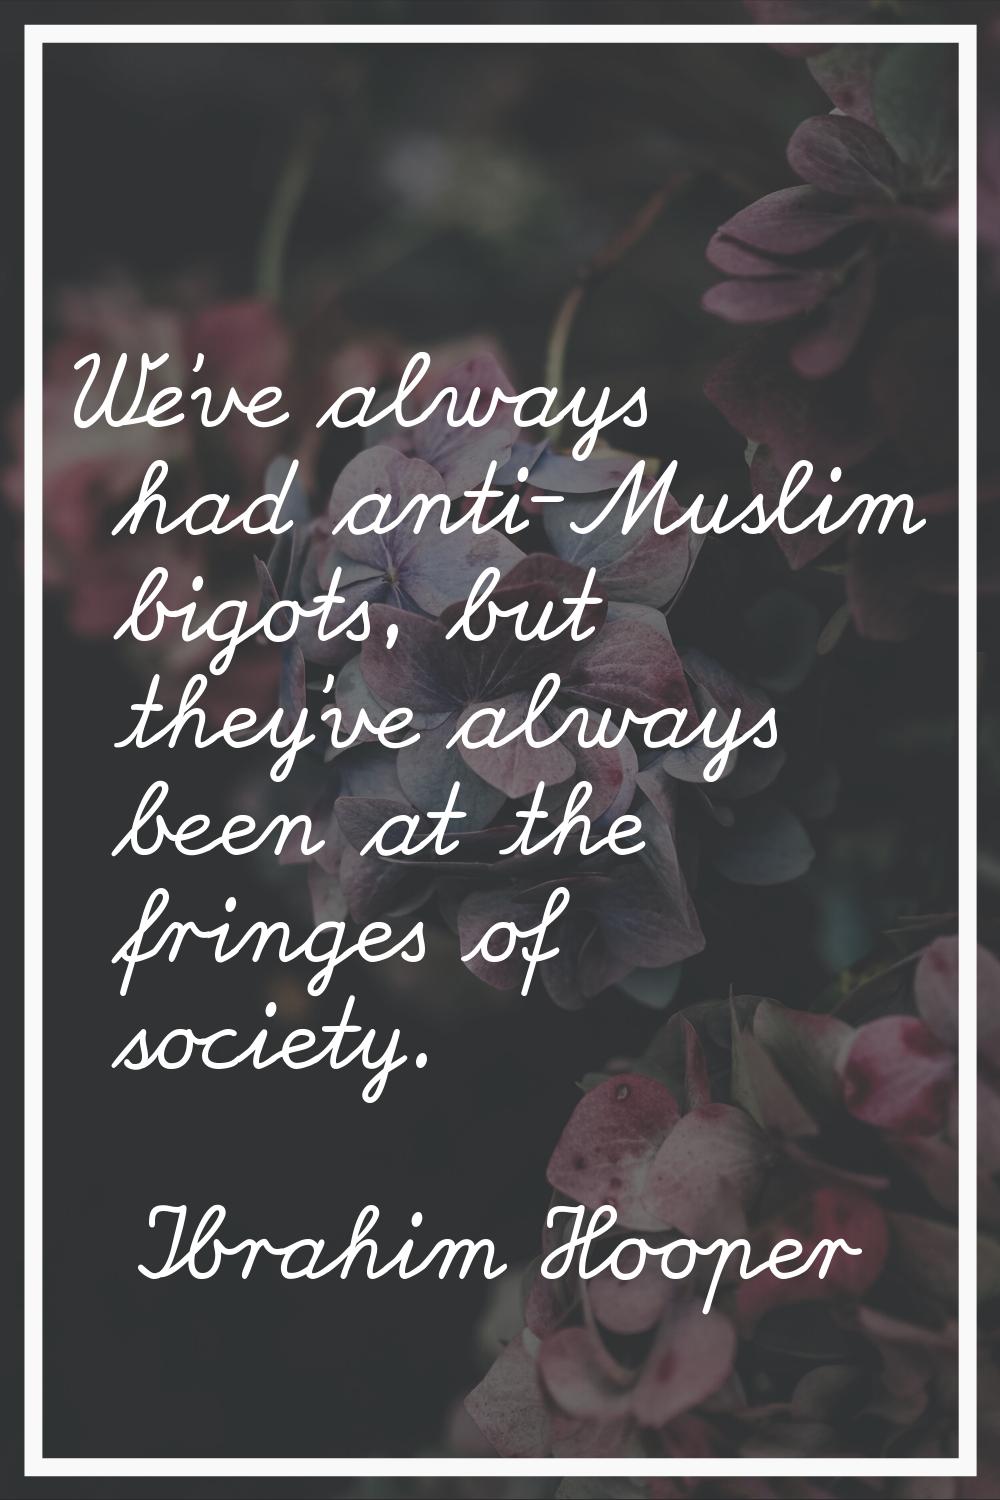 We've always had anti-Muslim bigots, but they've always been at the fringes of society.